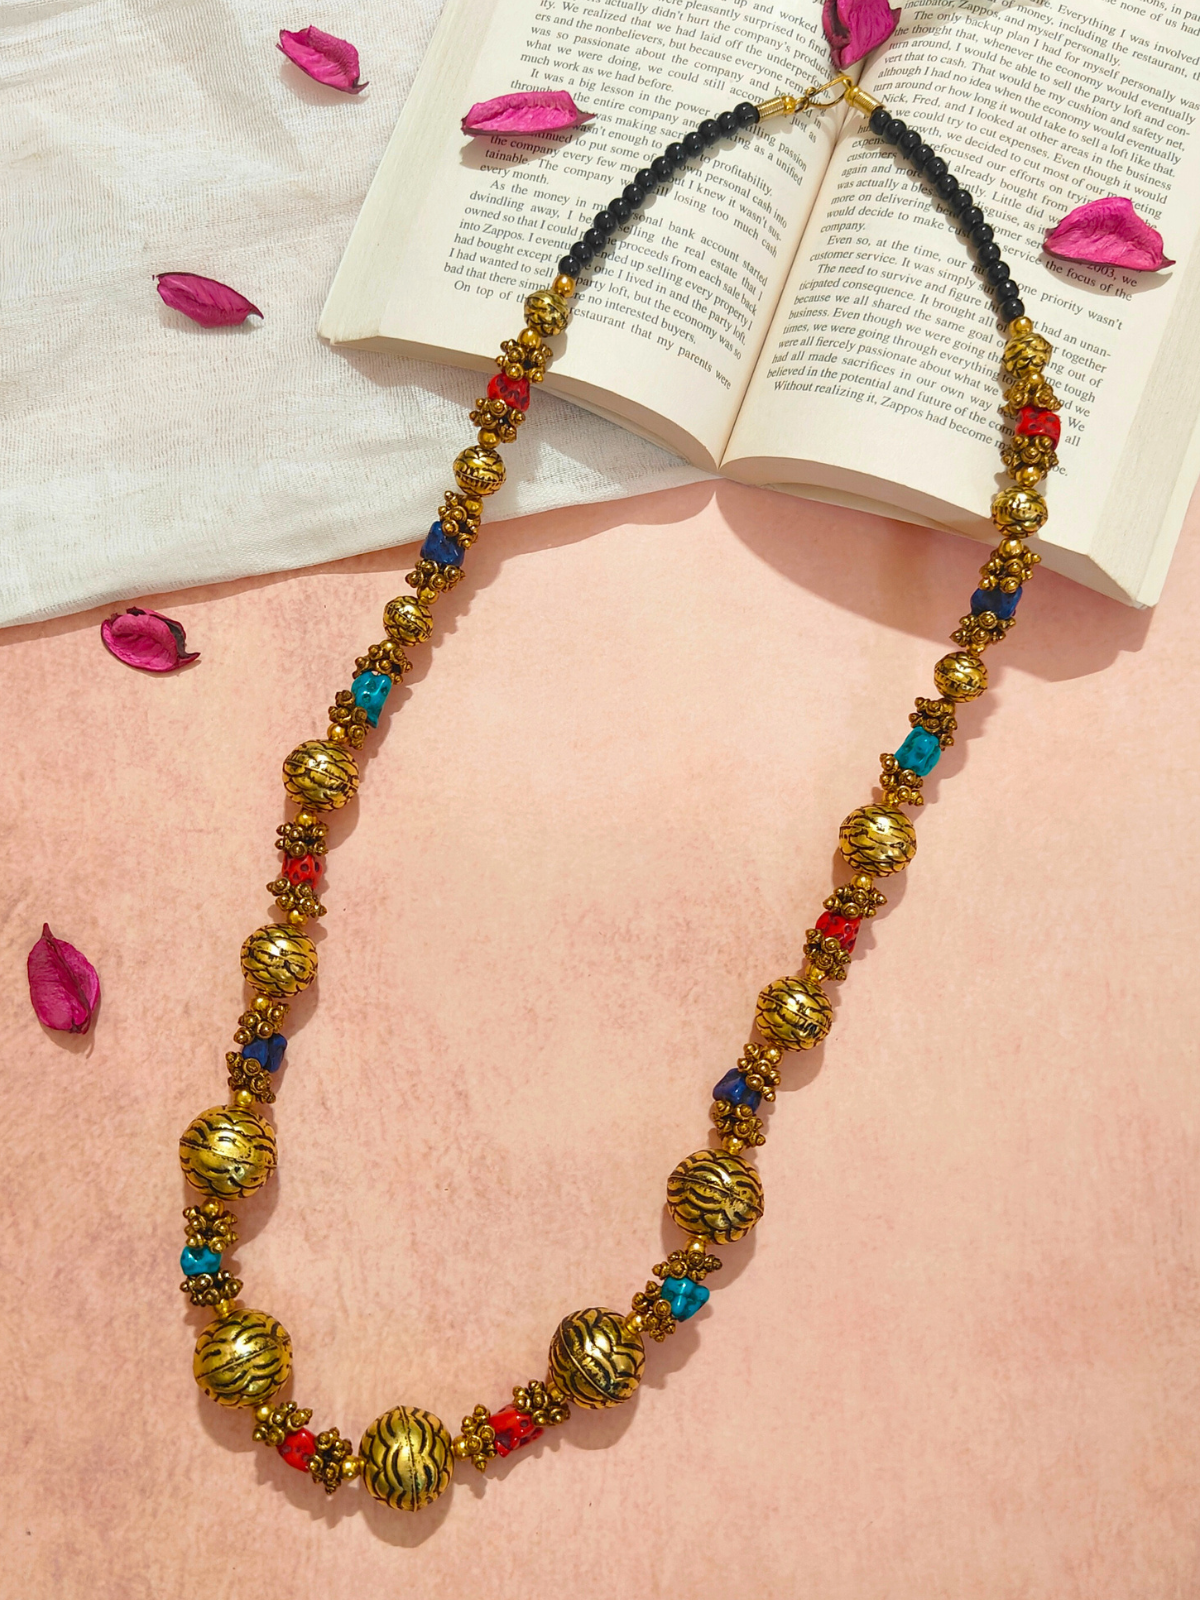 The Replenished Aparajita Necklace with Mulicolor Beads